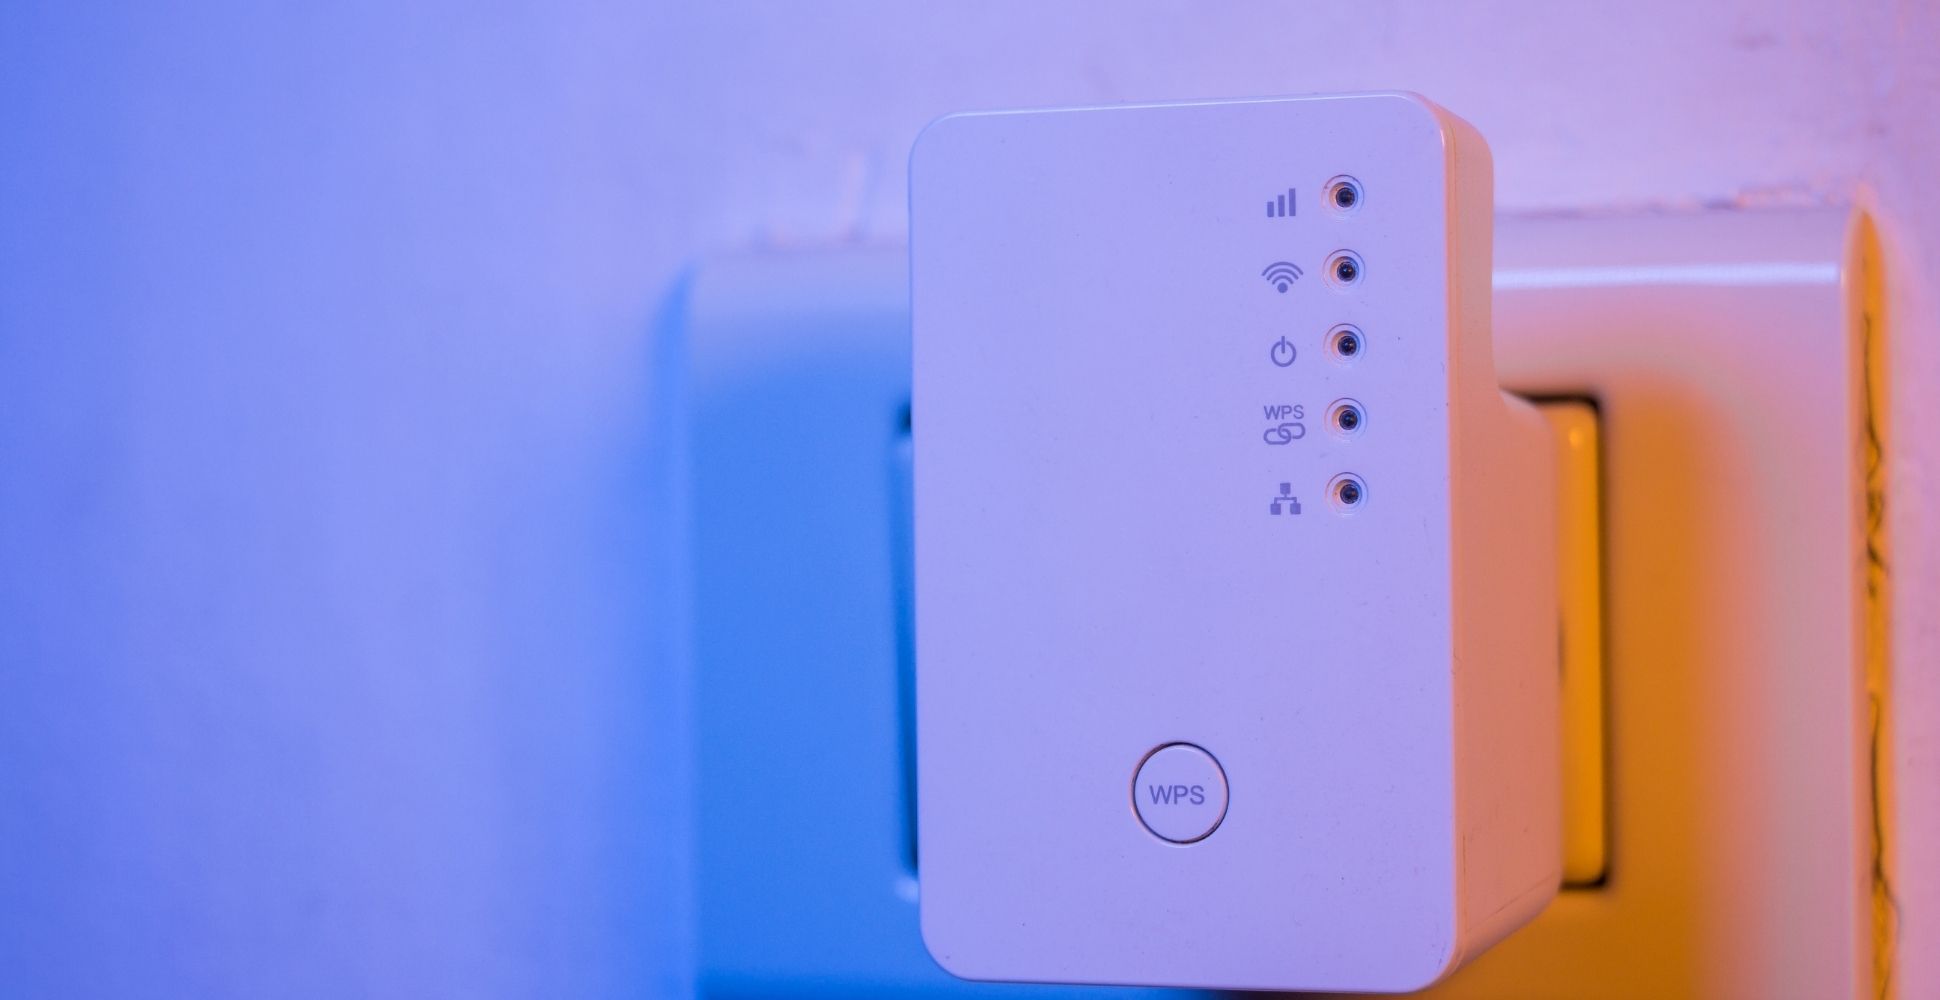 best home wifi booster uk